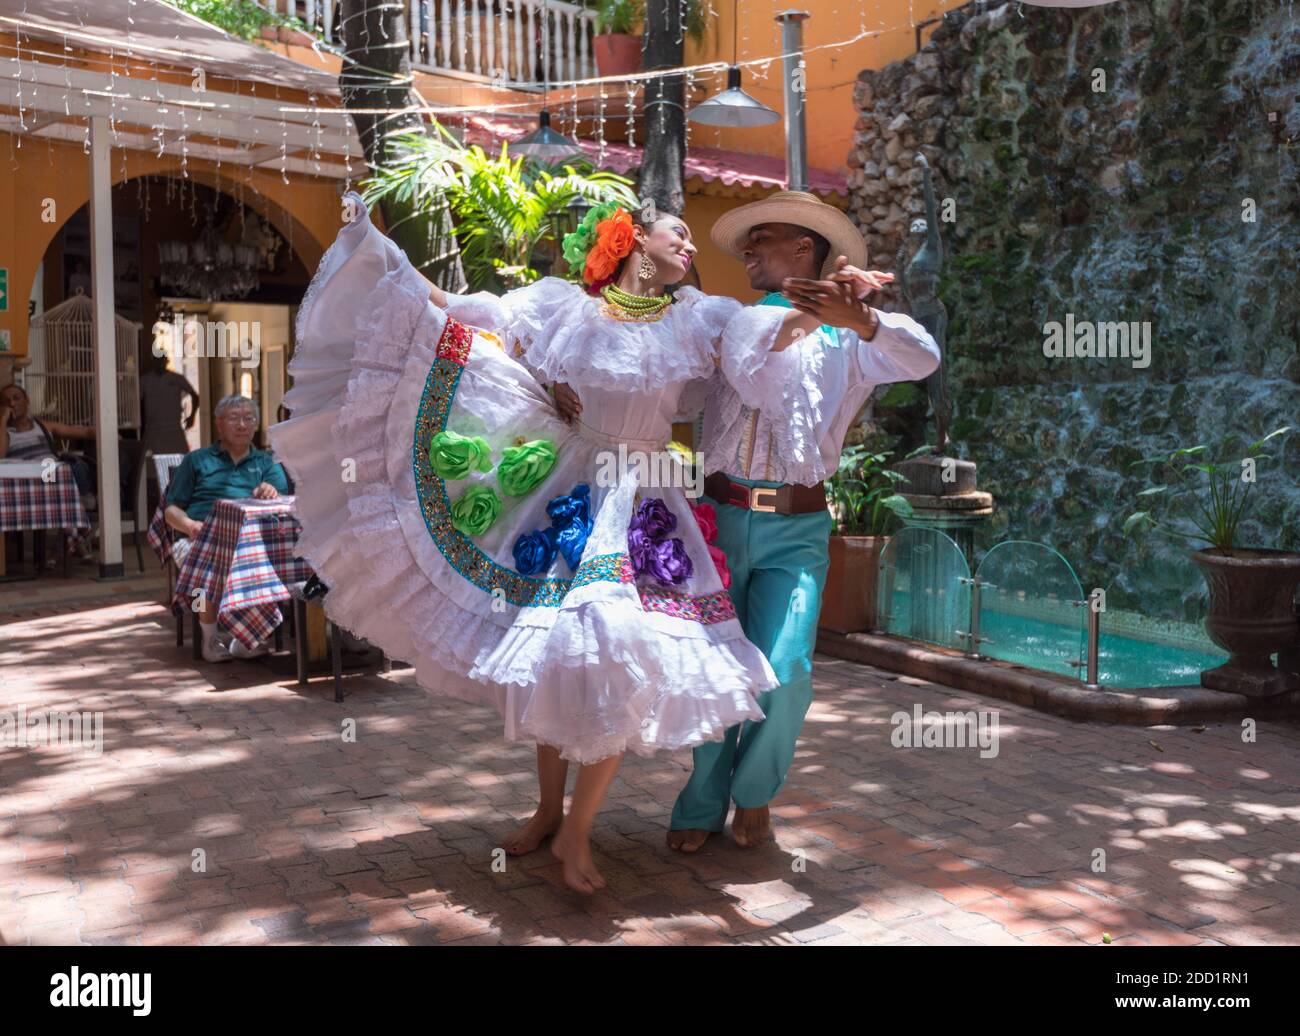 Cartagena, Colombia--April 21, 2018. Dancers in traditional garb perform a traditional dance in a restaurant. Stock Photo